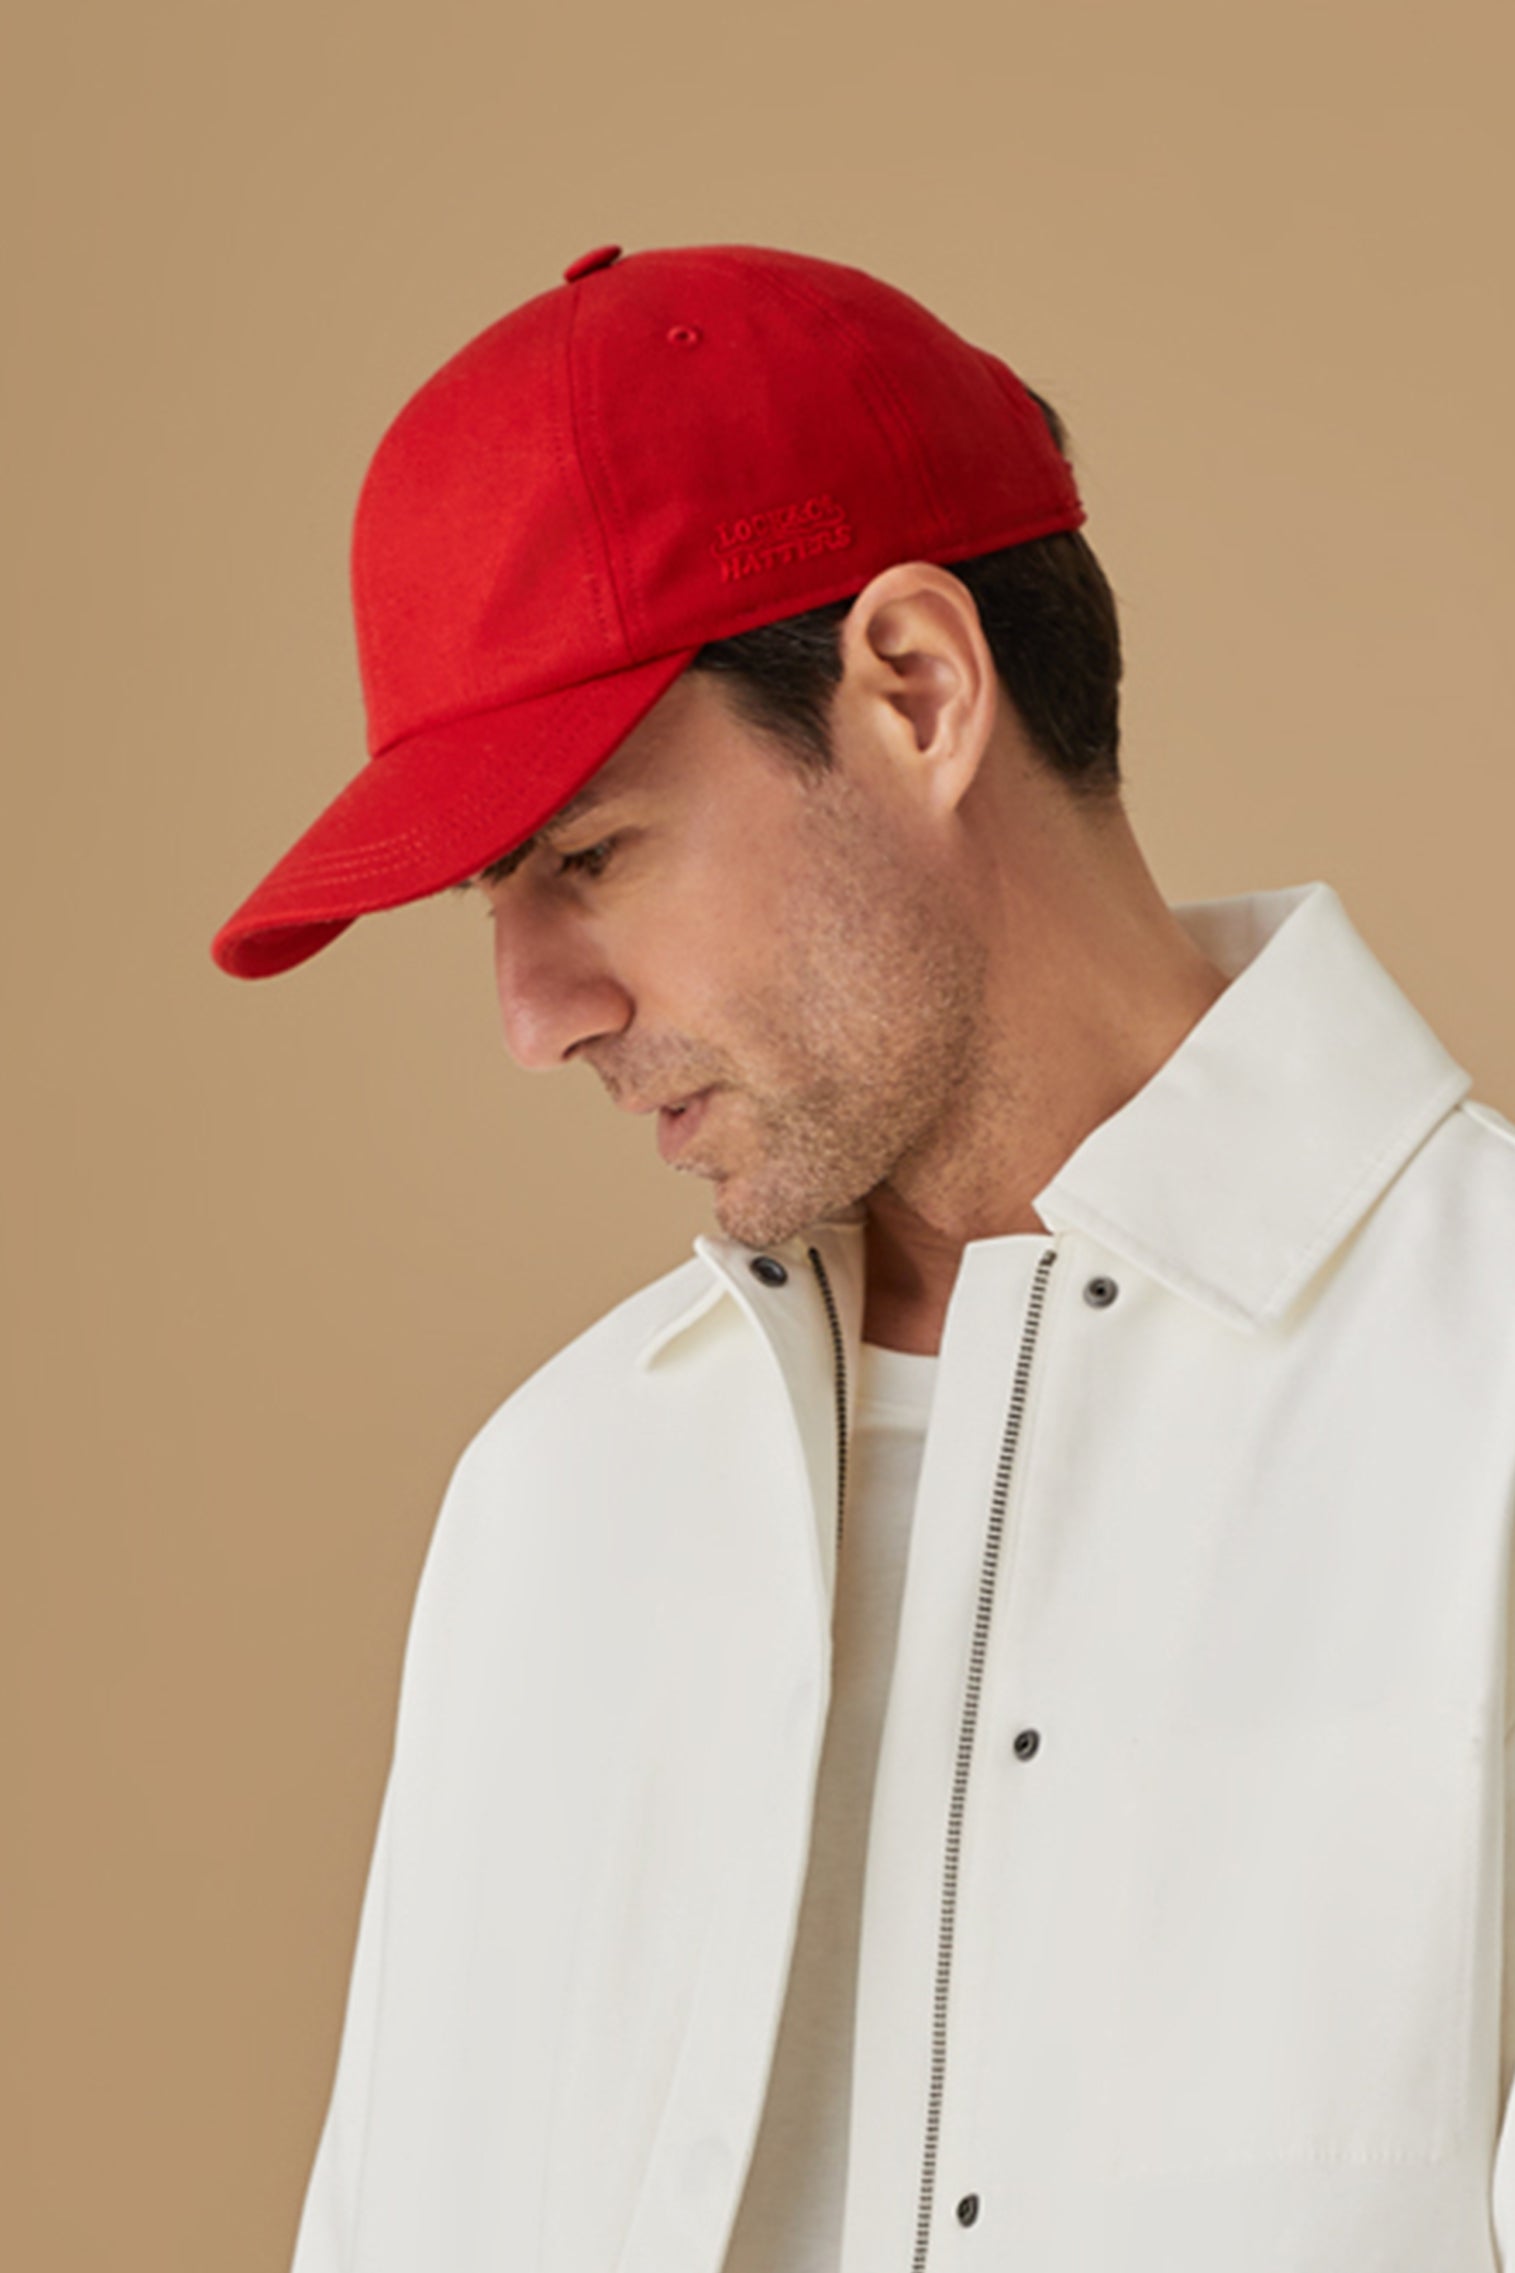 Adjustable Red Baseball Cap - Womens Featured - Lock & Co. Hatters London UK